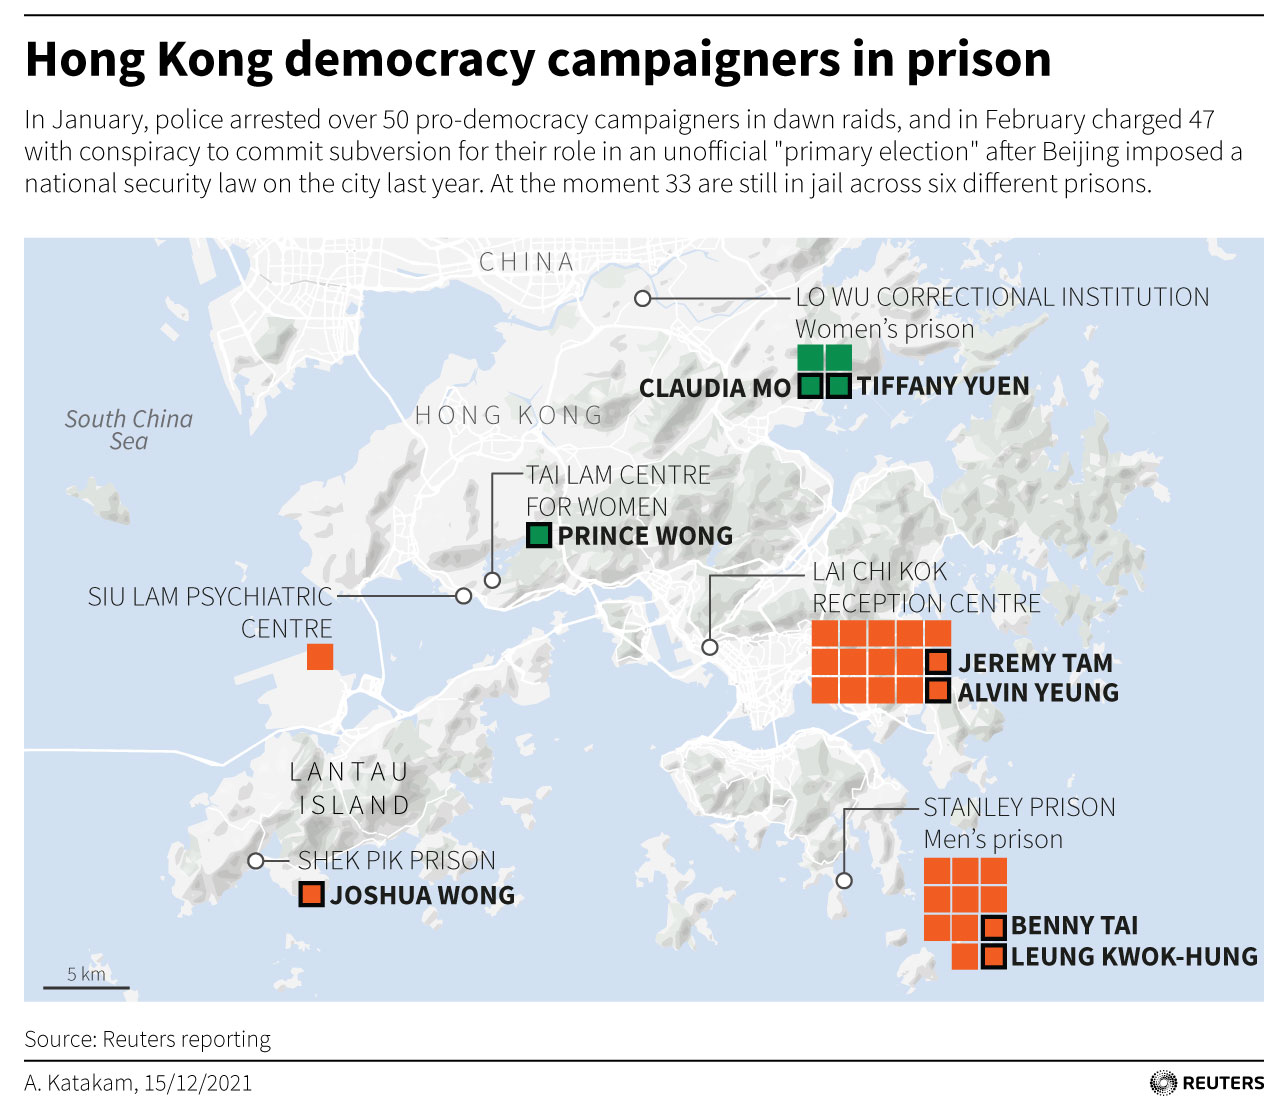 Hong Kong democracy campaigners in prison